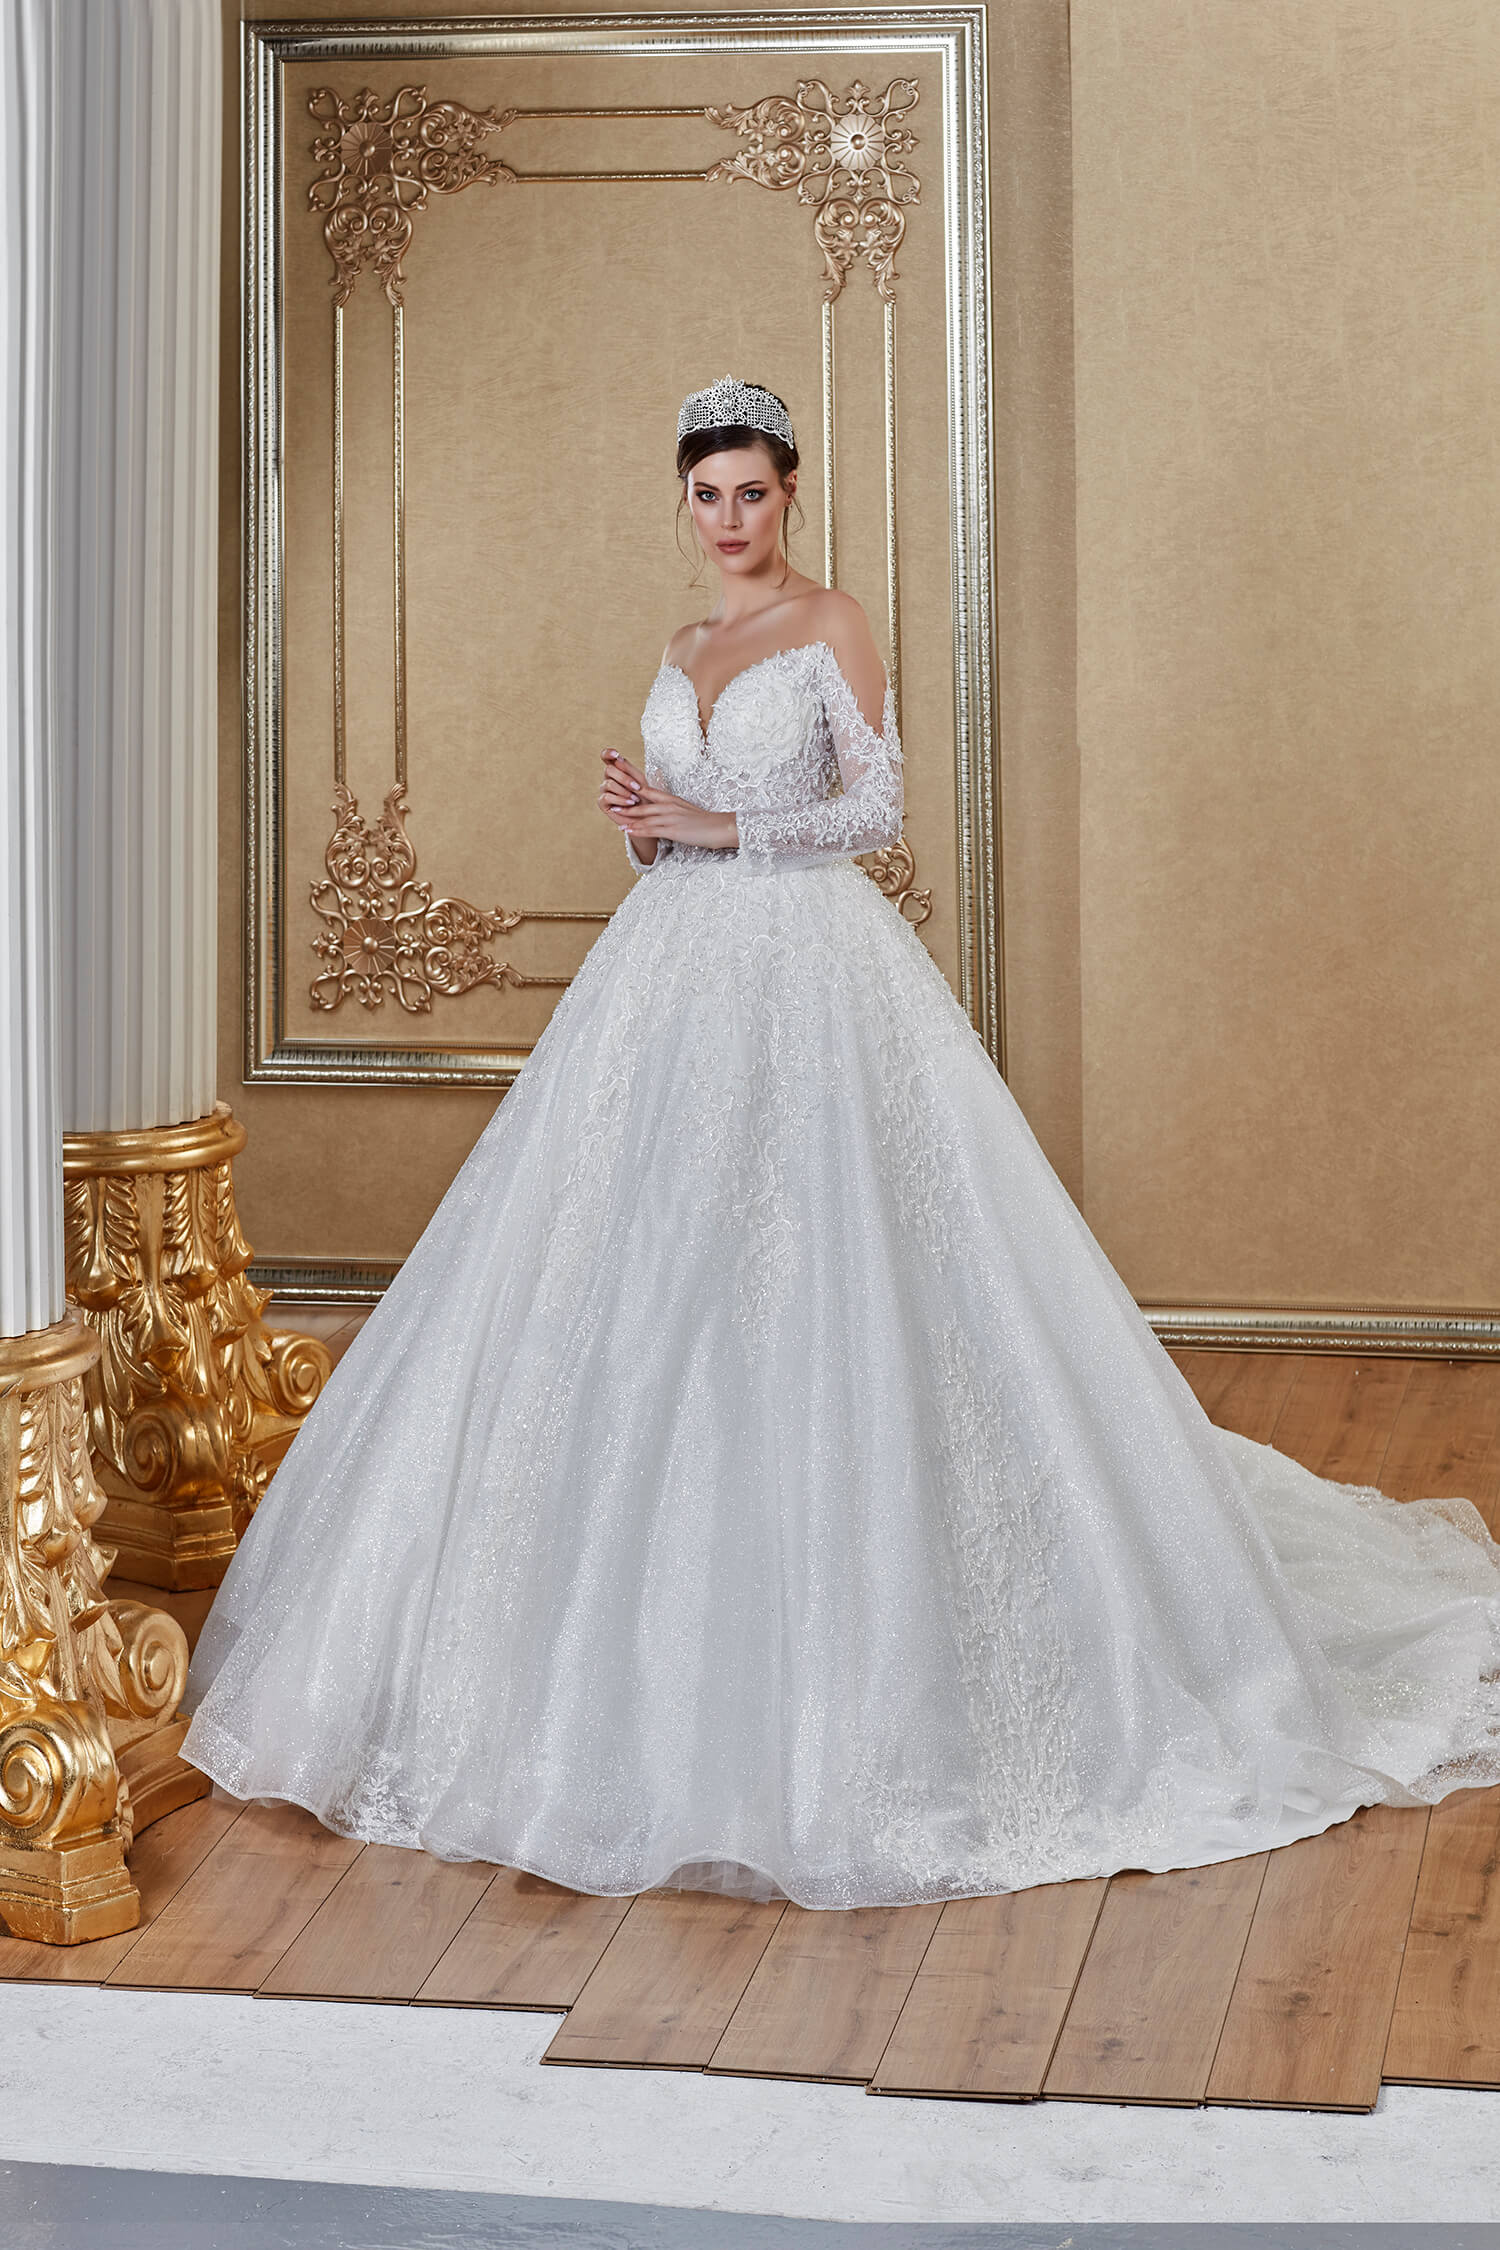 Long Sleeve Lace Embroidered Princess Wedding Dress with Sweetheart Neck Shoulder Window